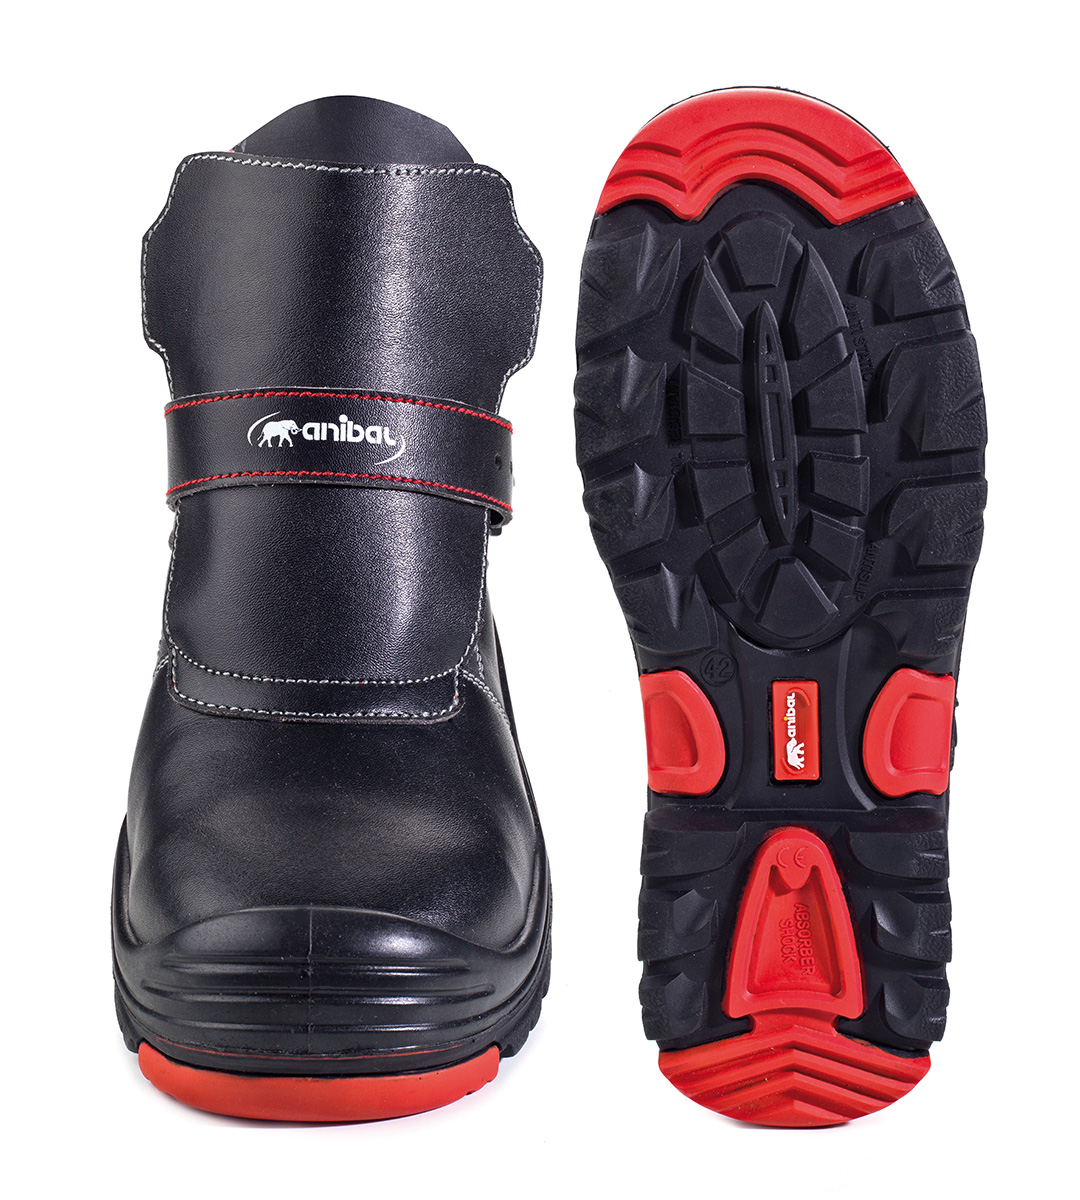 1688-BSOGNR Safety Footwear PU/Nitrilo Bota mod. “TERMOPILAS”.
Microfiber welder boot in S3 with double density sole Polyurethane / Rubber Nitrile.